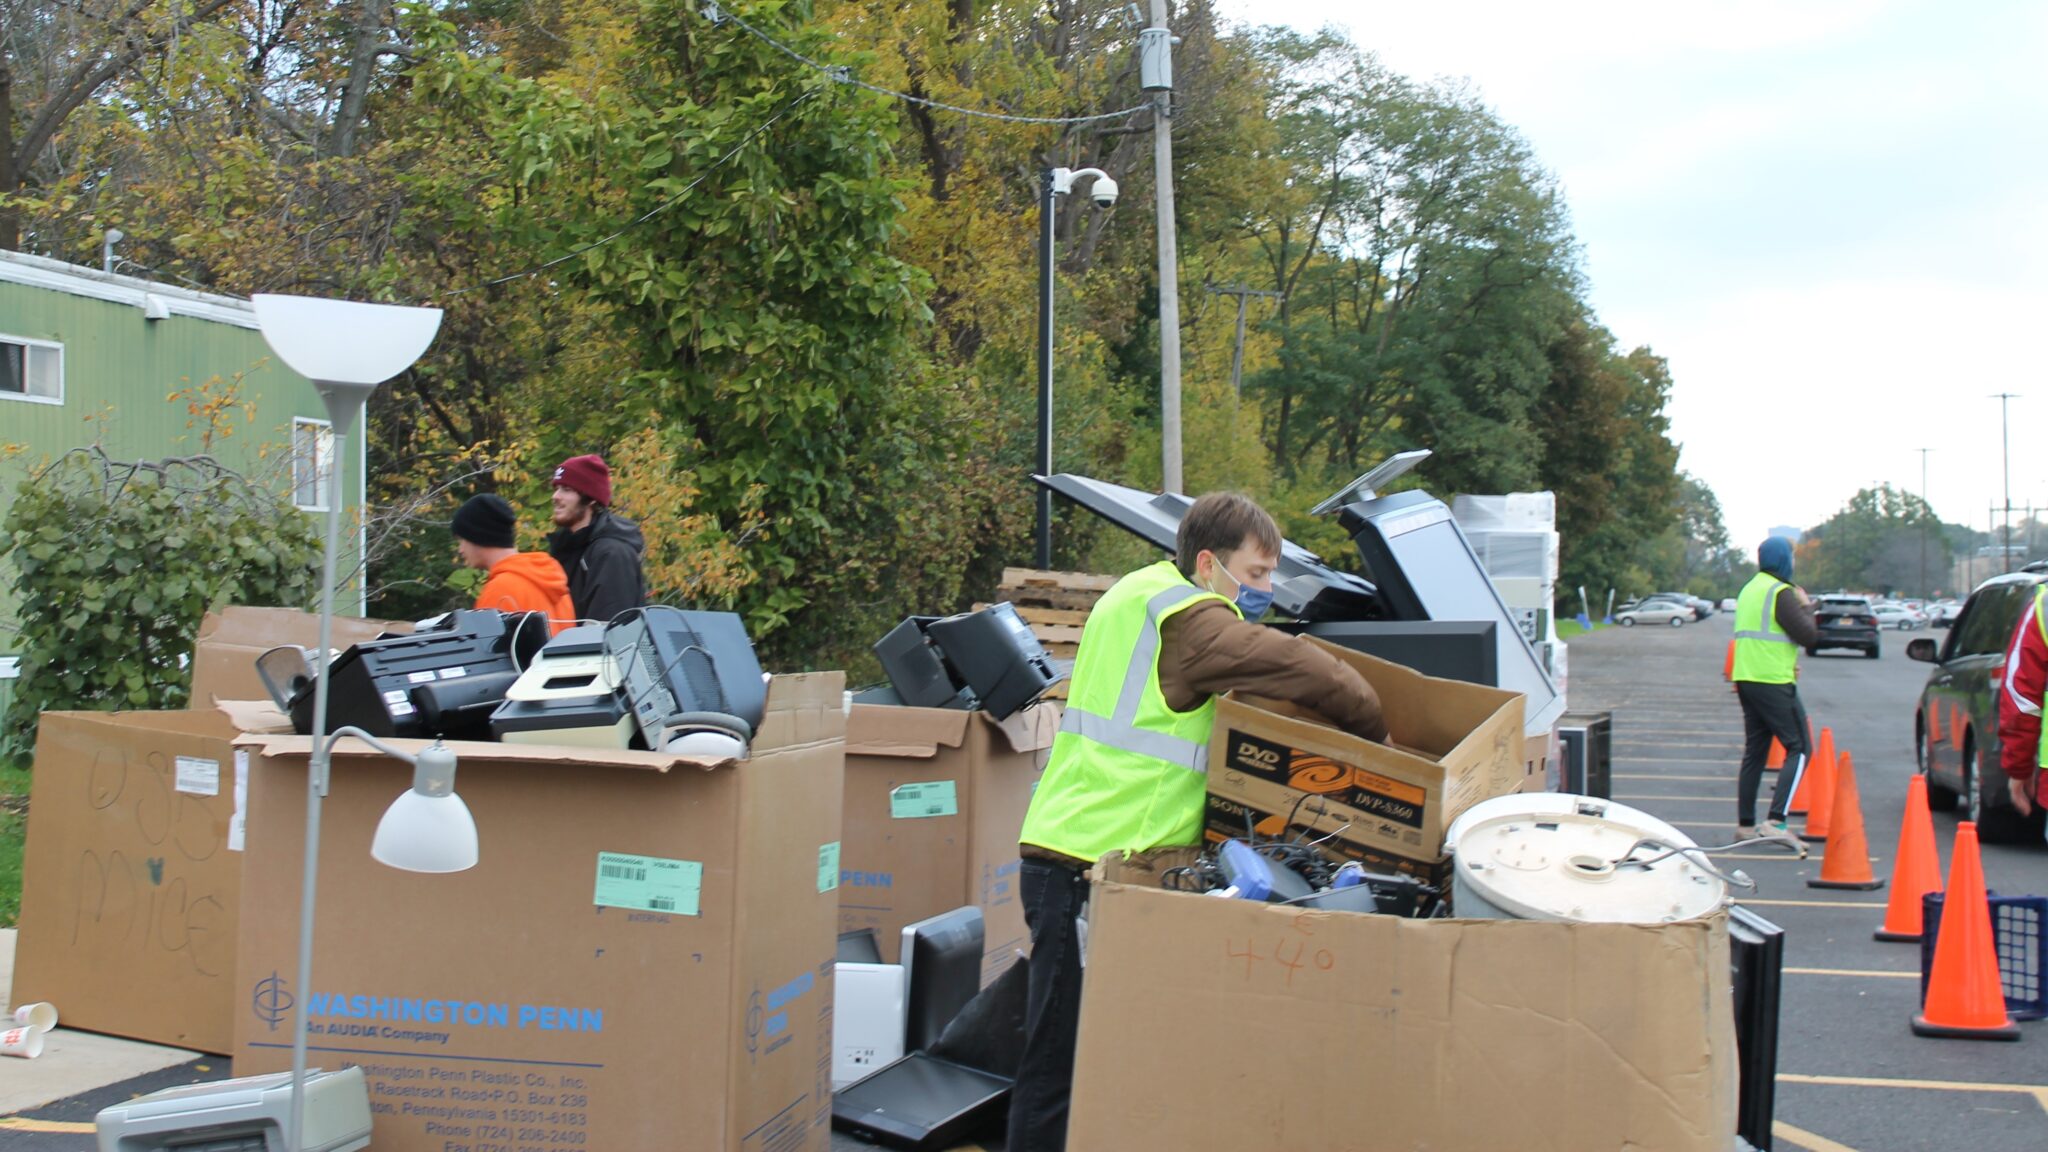 A volunteer sorting through boxes of recycled electronics at the E-Cycle Day event